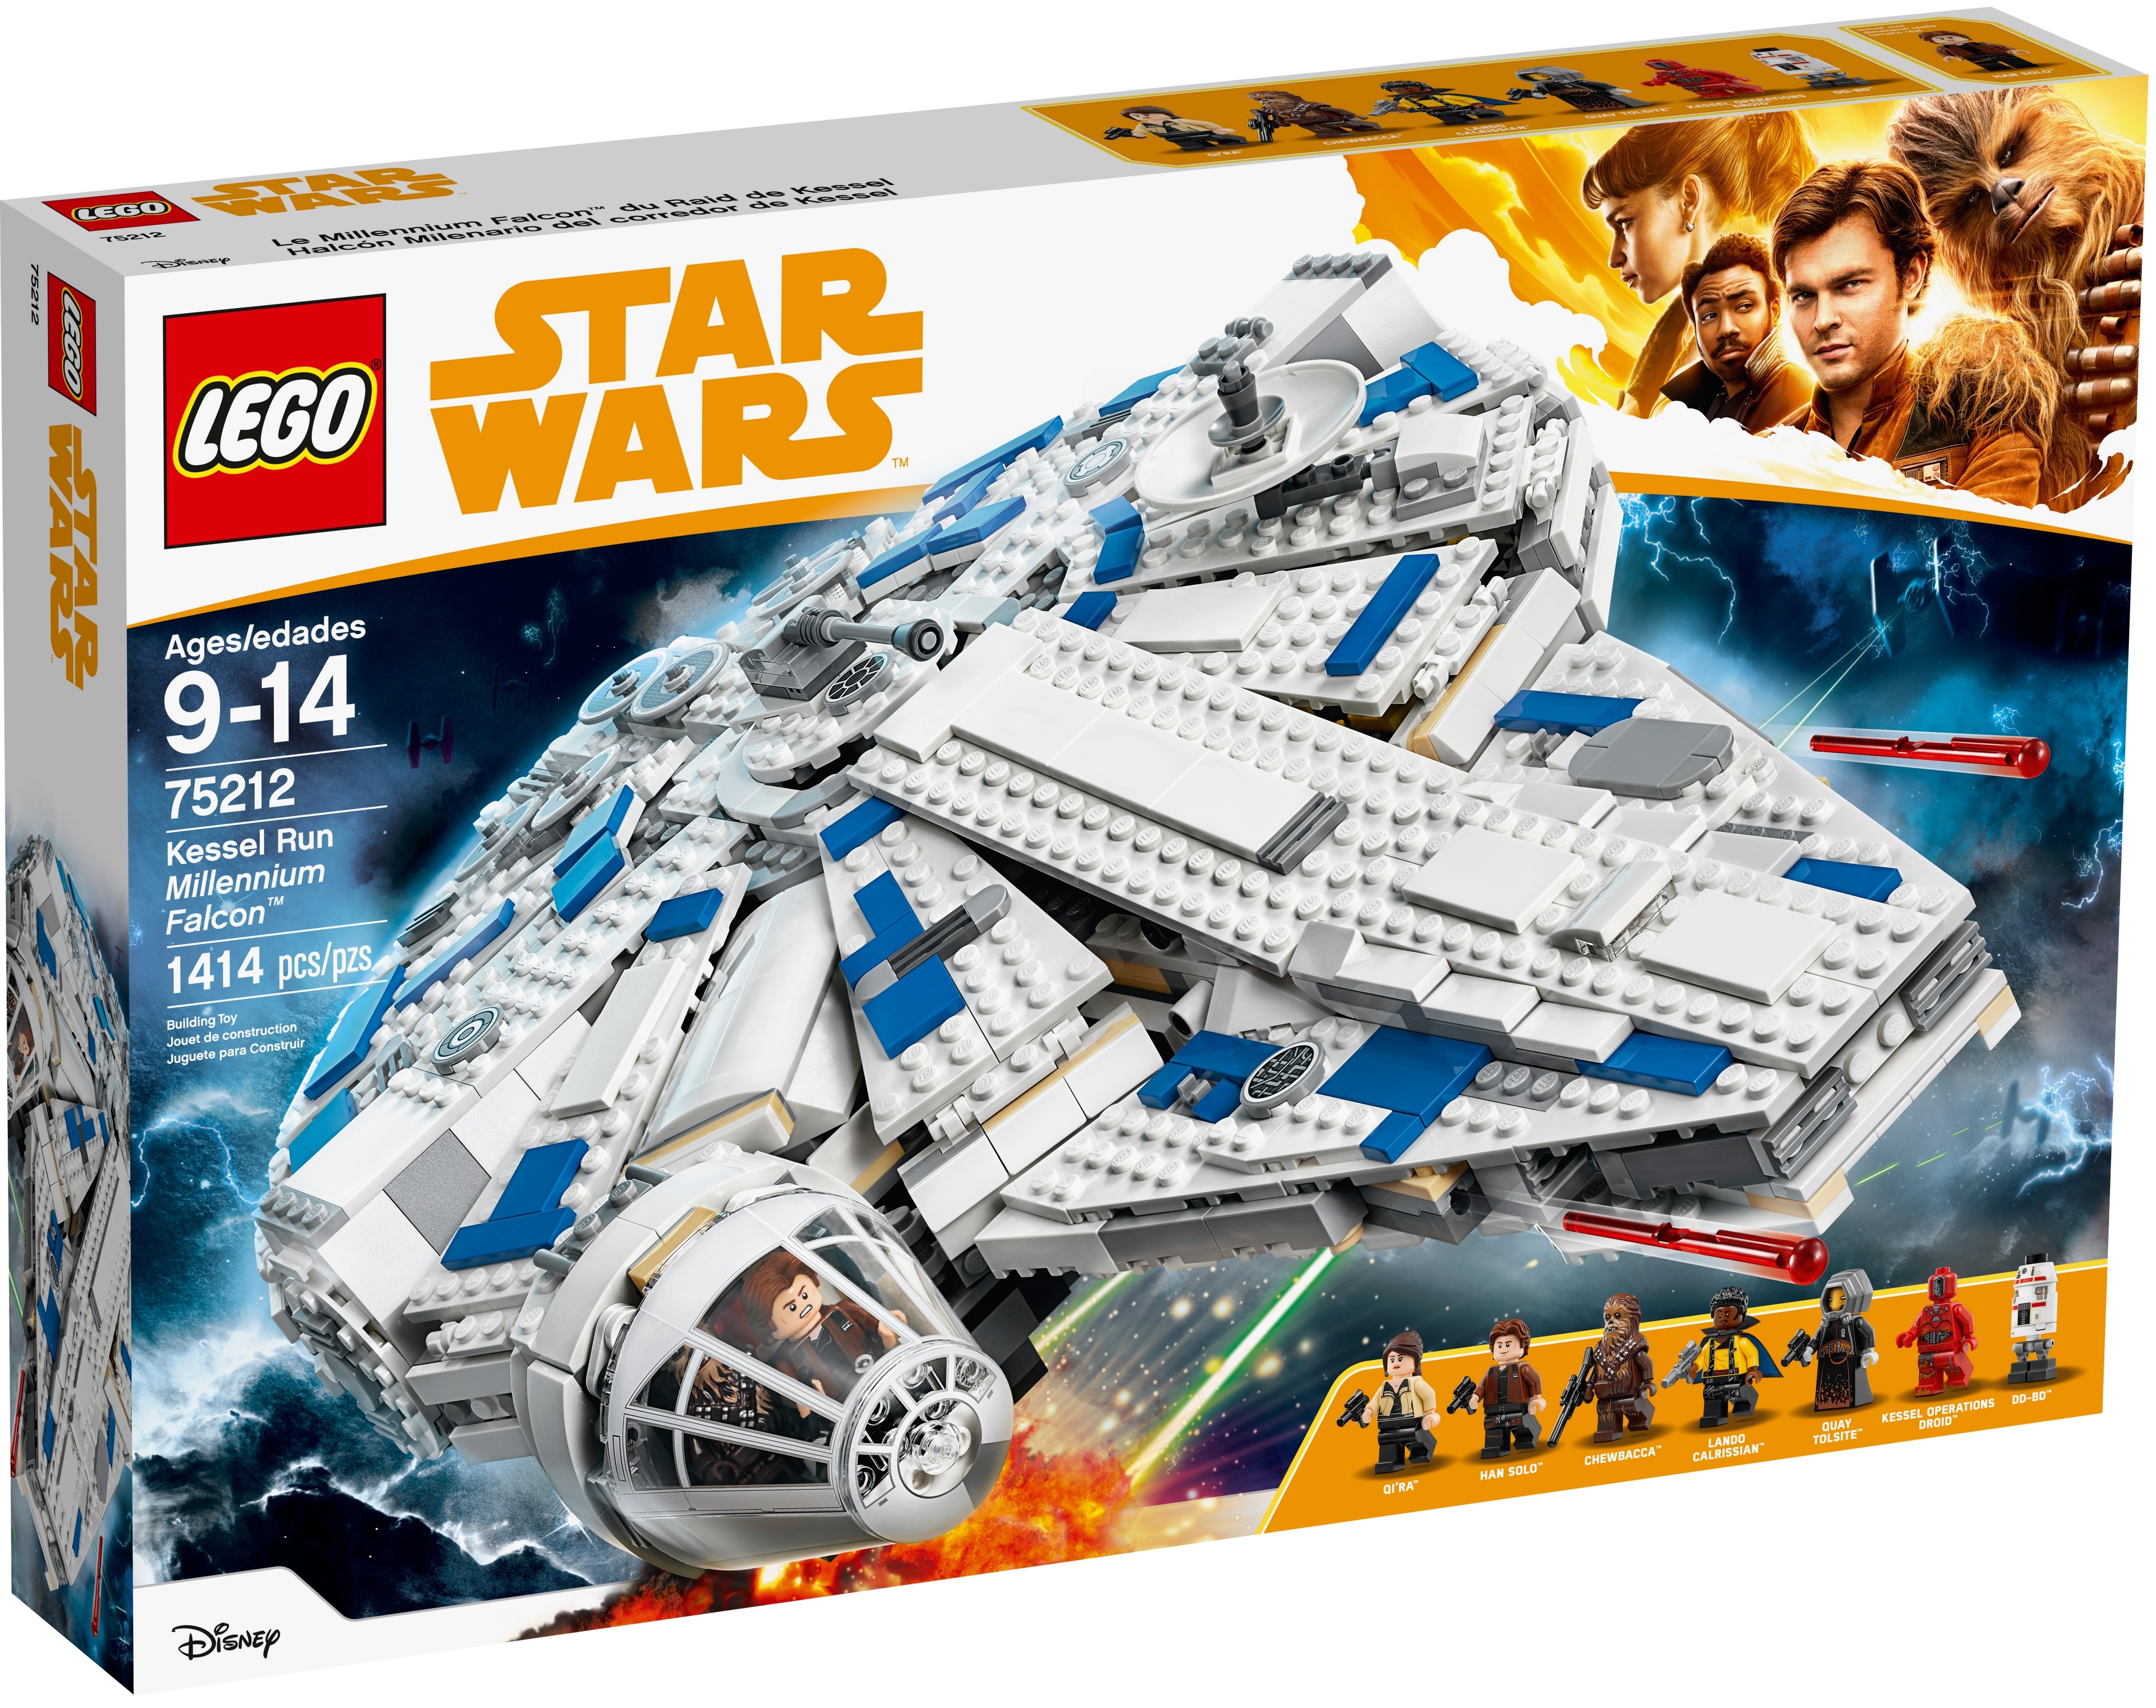 A Star Wars Story Kessel Run Millennium Falcon 75212 Building Kit and Starship Model Set Popular Building Toy and Gift for Kids LEGO Star Wars Solo 1414 Piece 